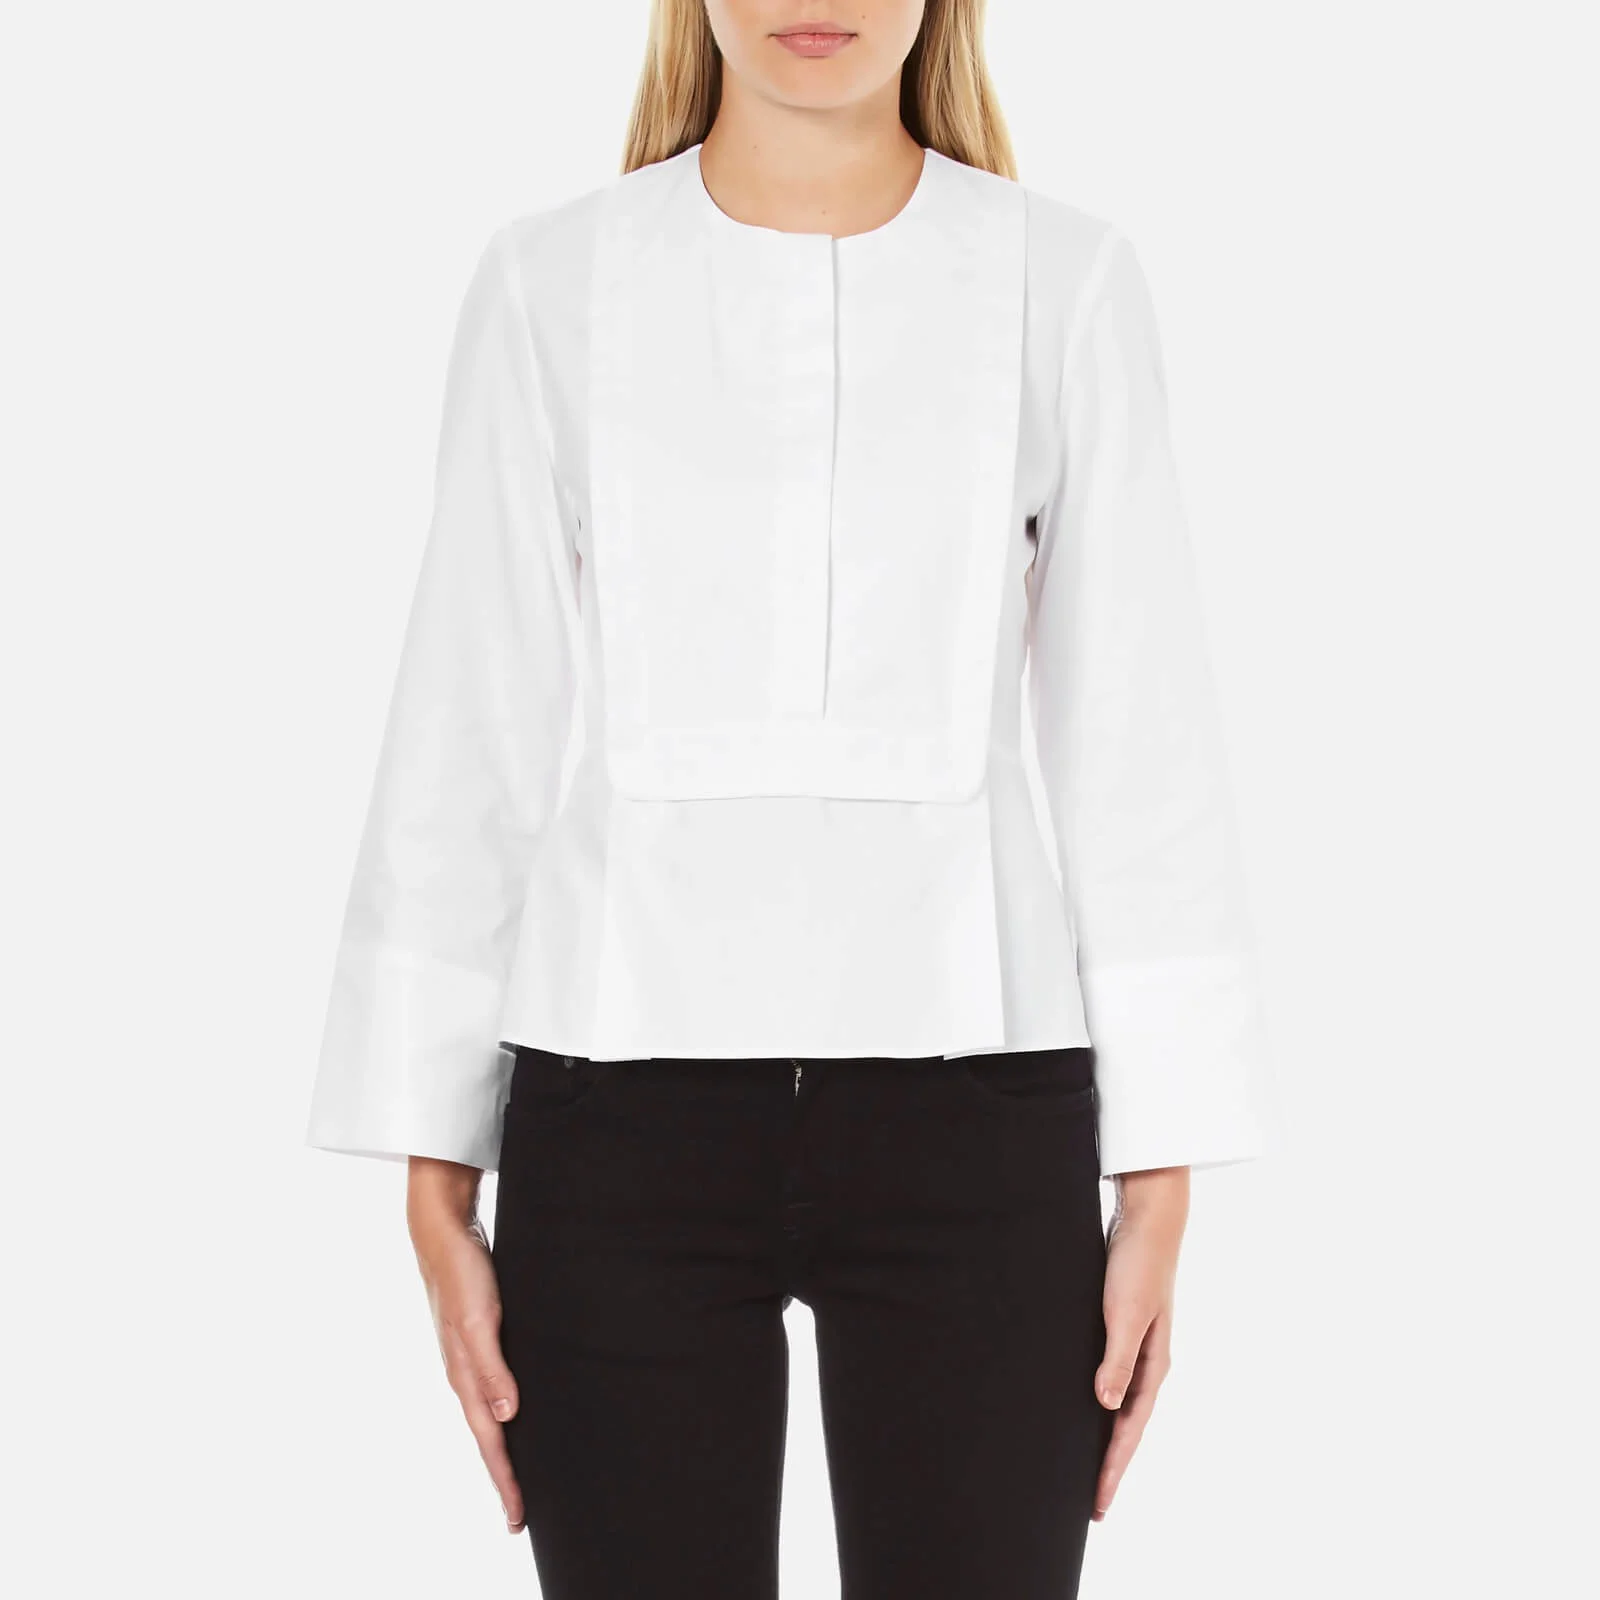 Carven Women's Wide Sleeve Shirt - White Image 1